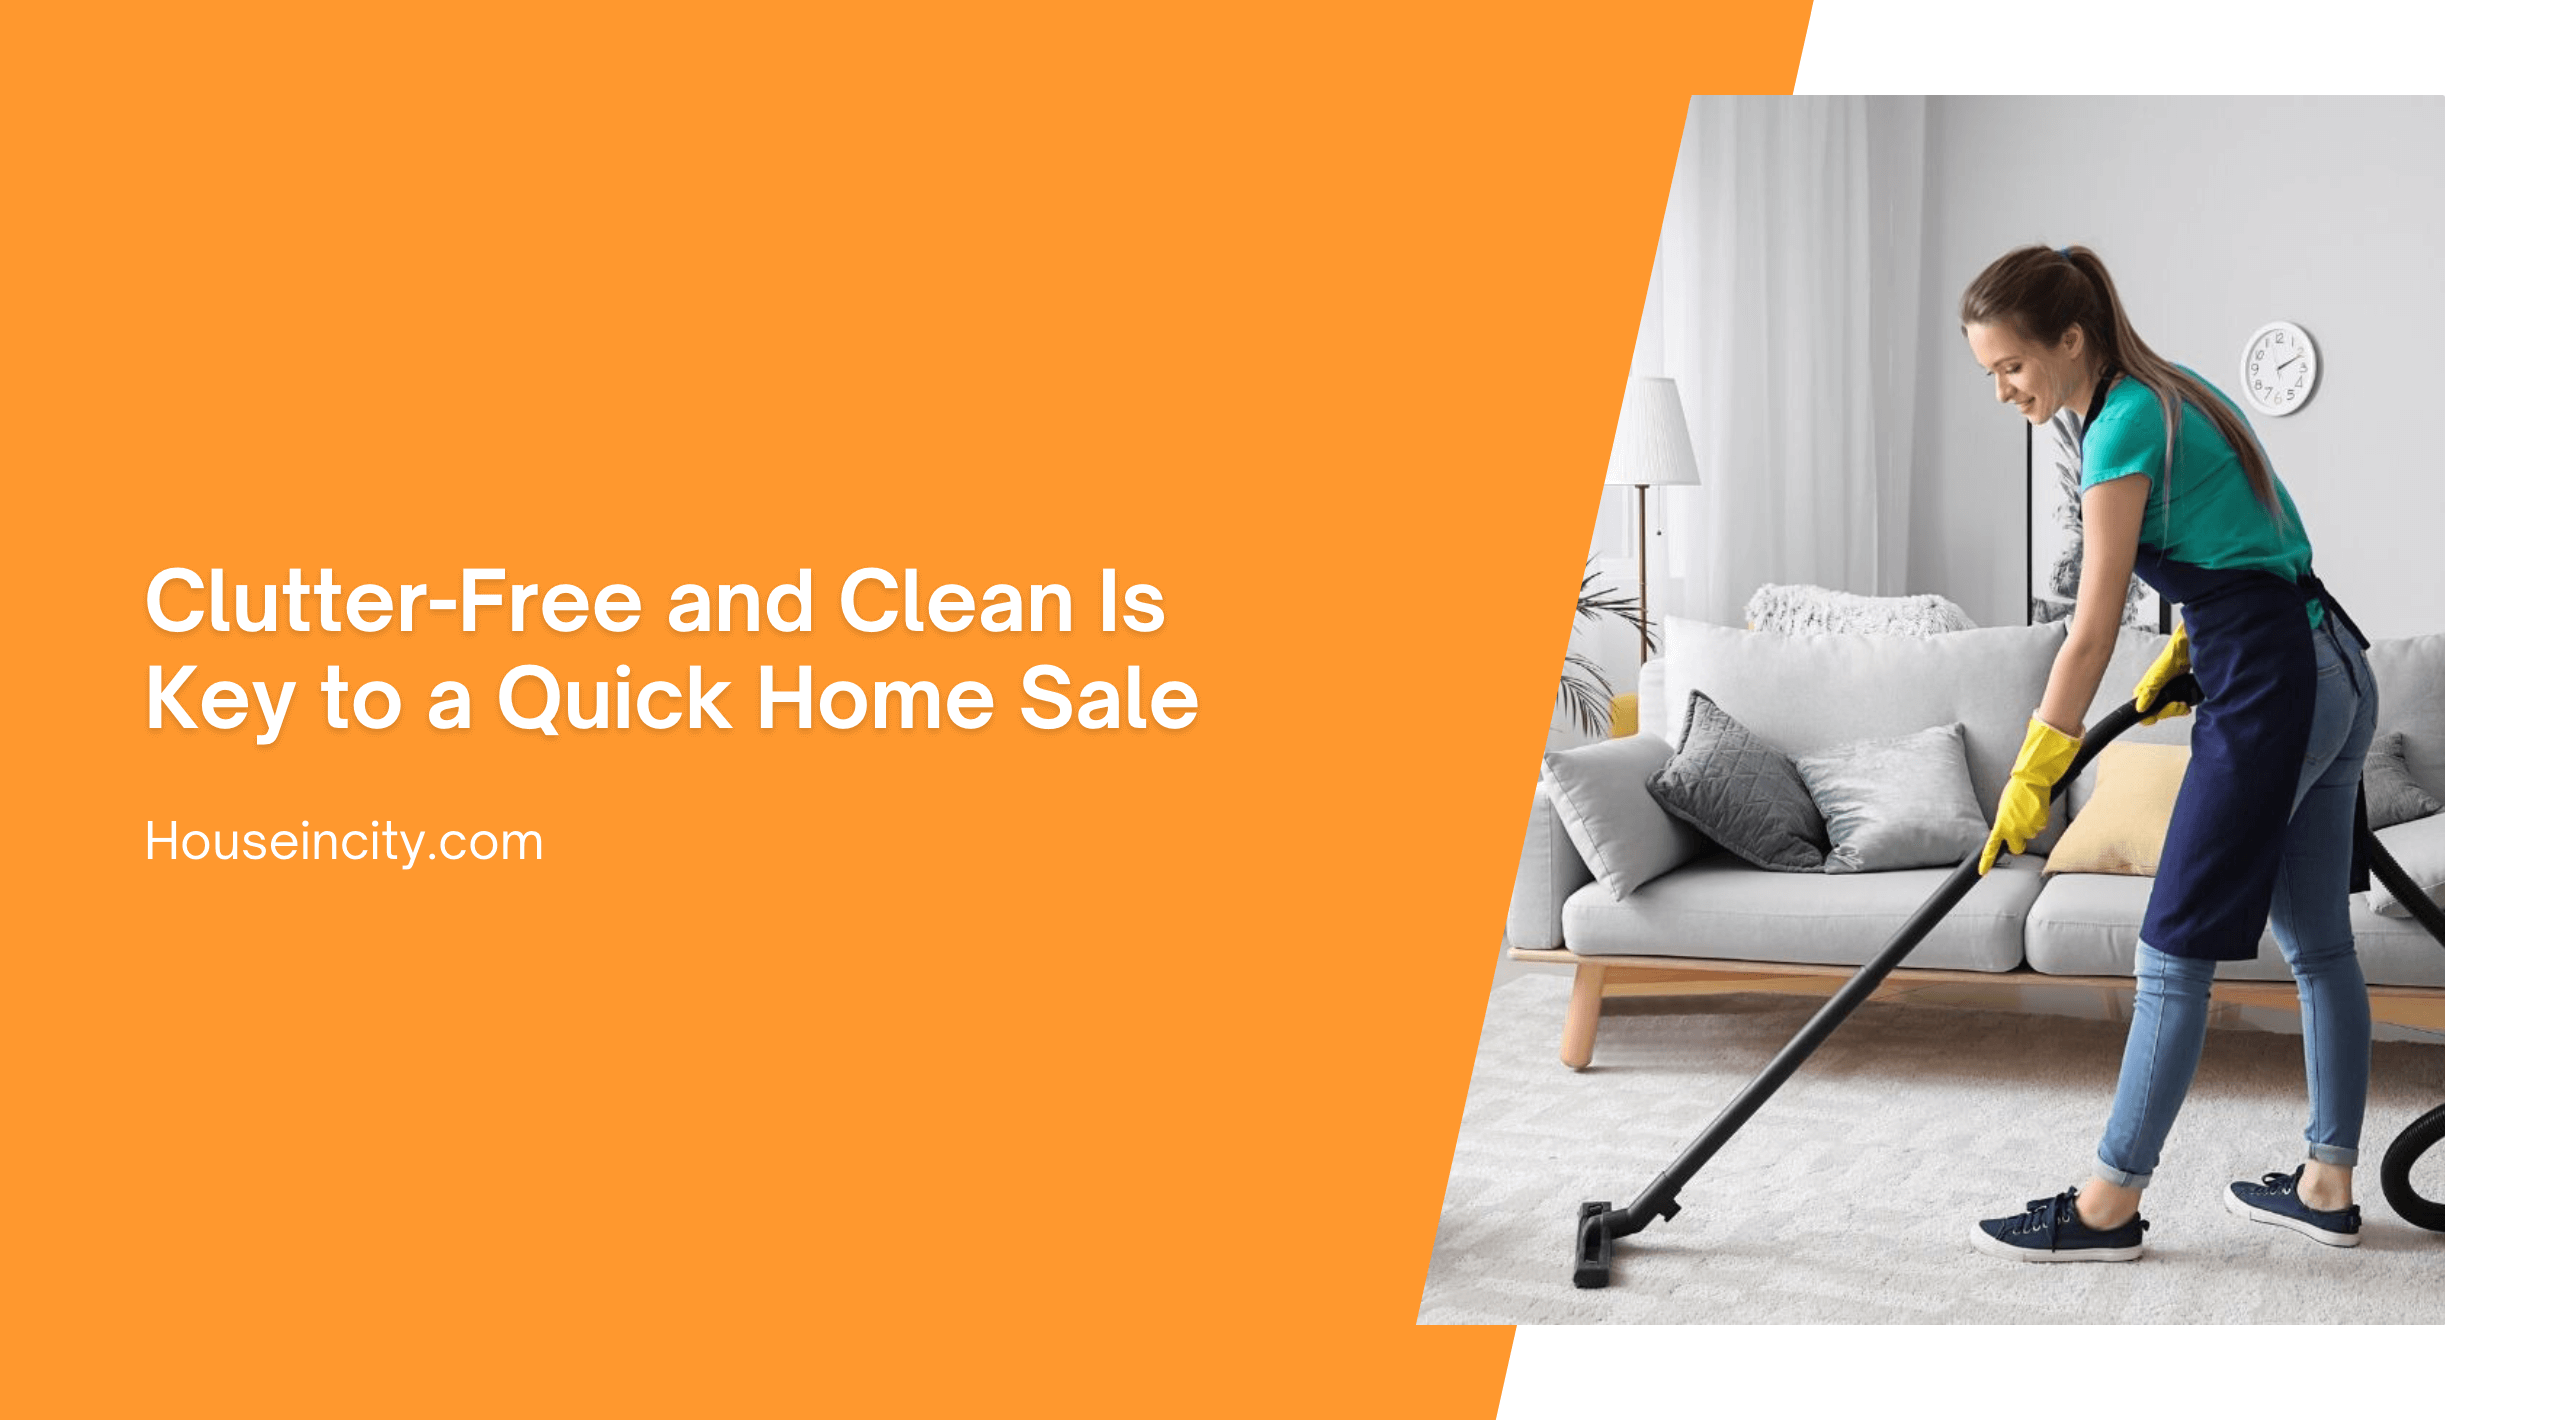 Clutter-Free and Clean Is Key to a Quick Home Sale